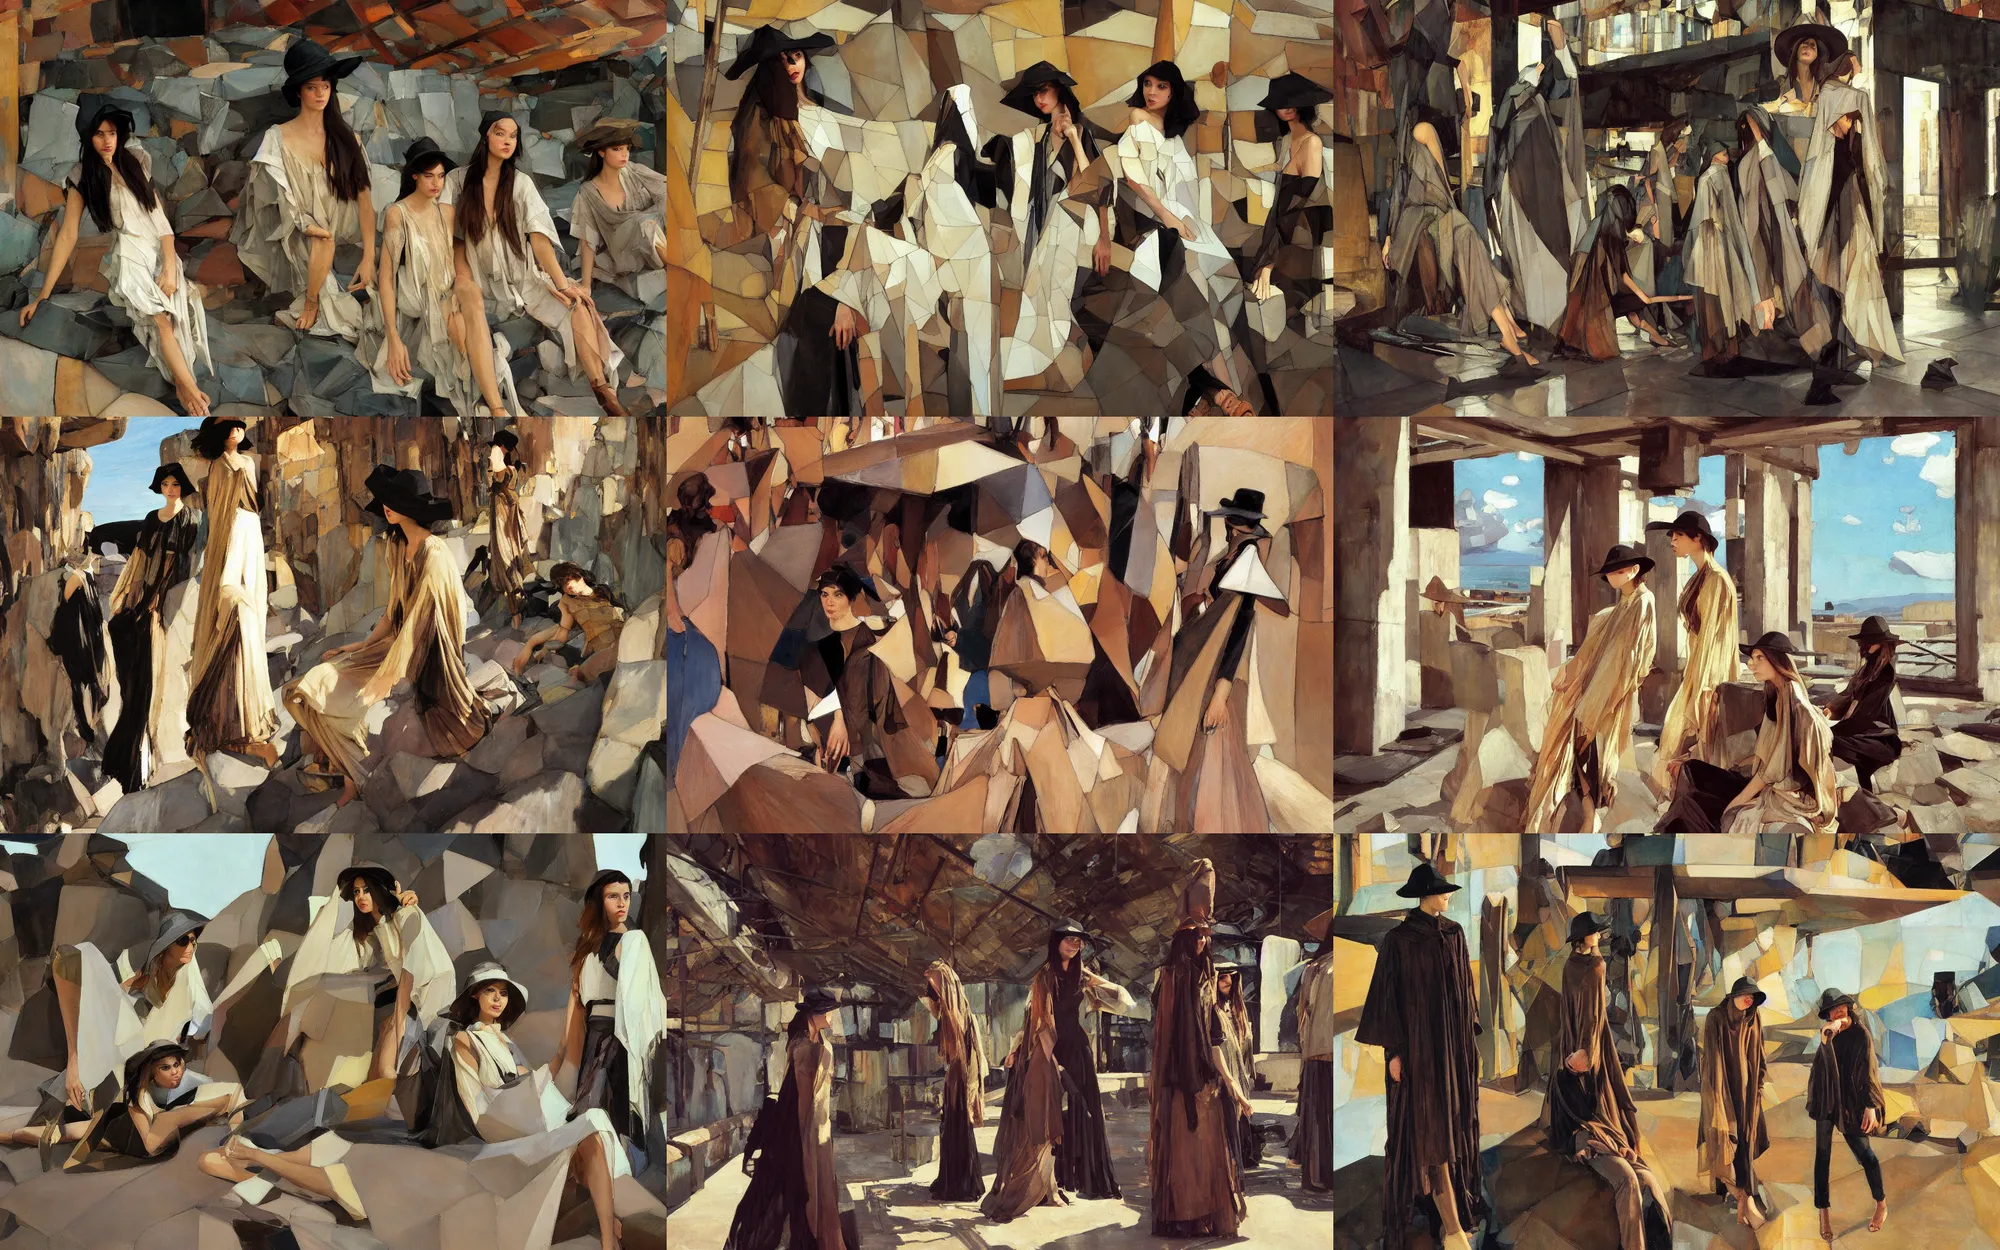 Prompt: low poly interior, dramatic light, industrial rusty pipes, simple form, brutal shapes, portrait of group of fashionable young womans wearing rich jewerly hat and boho poncho, lying pose on stones, 1970s fashion, Low poly, thunder clouds in the sky, artwork by Joaquin Sorolla and Denis Sarazhin and john william waterhouse and klimt and rhads and van gogh and Dean Ellis and Detmold Charles Maurice